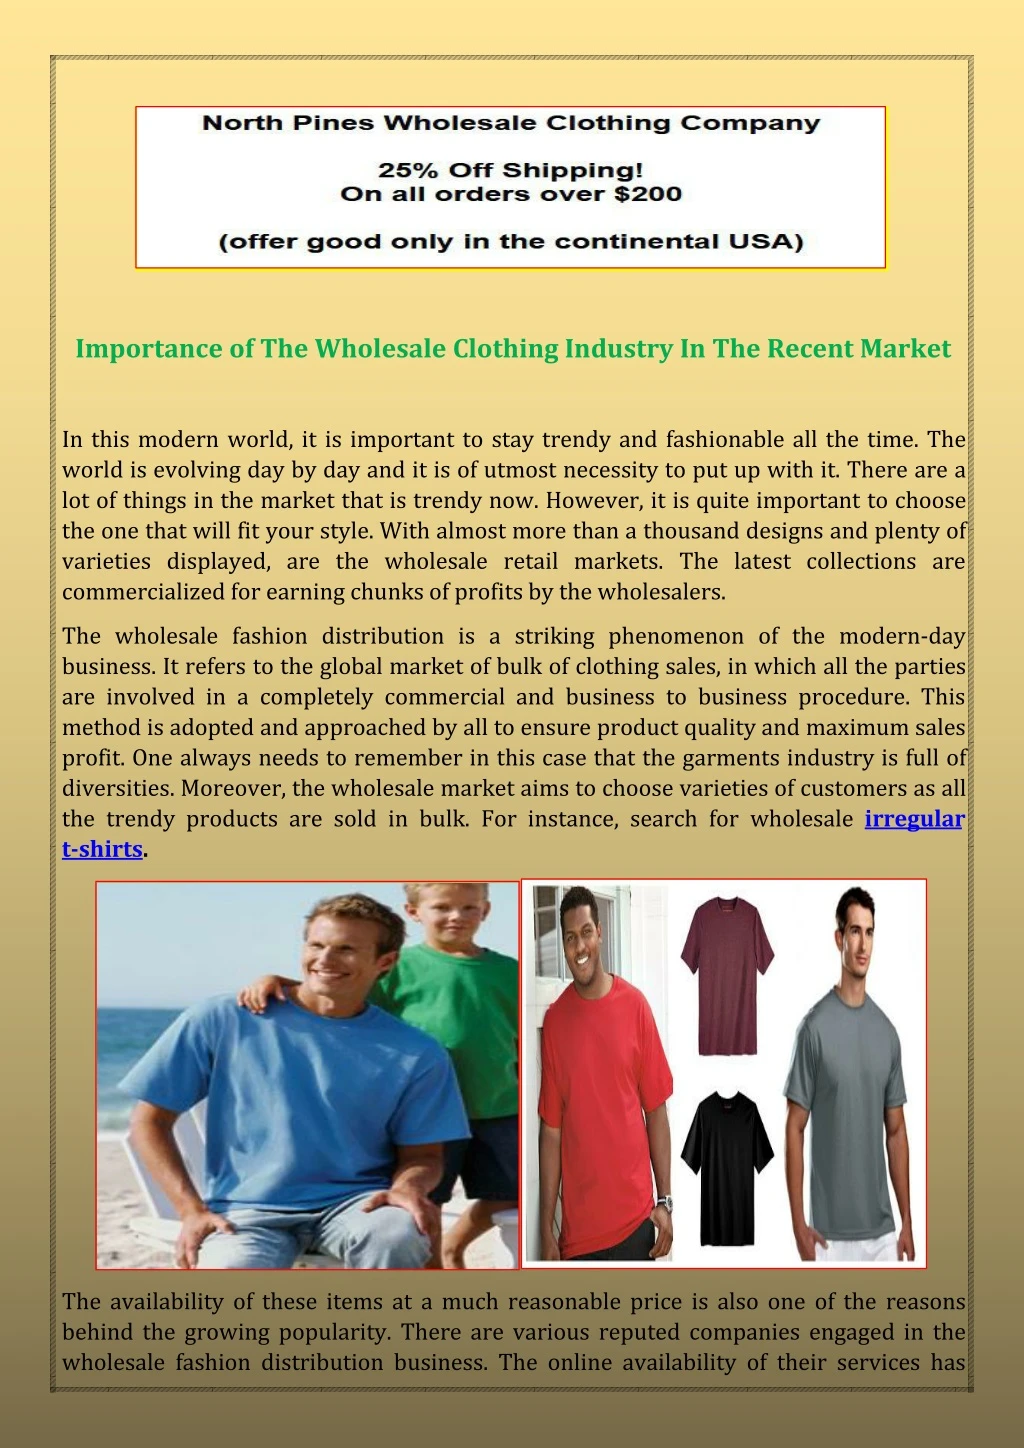 importance of the wholesale clothing industry